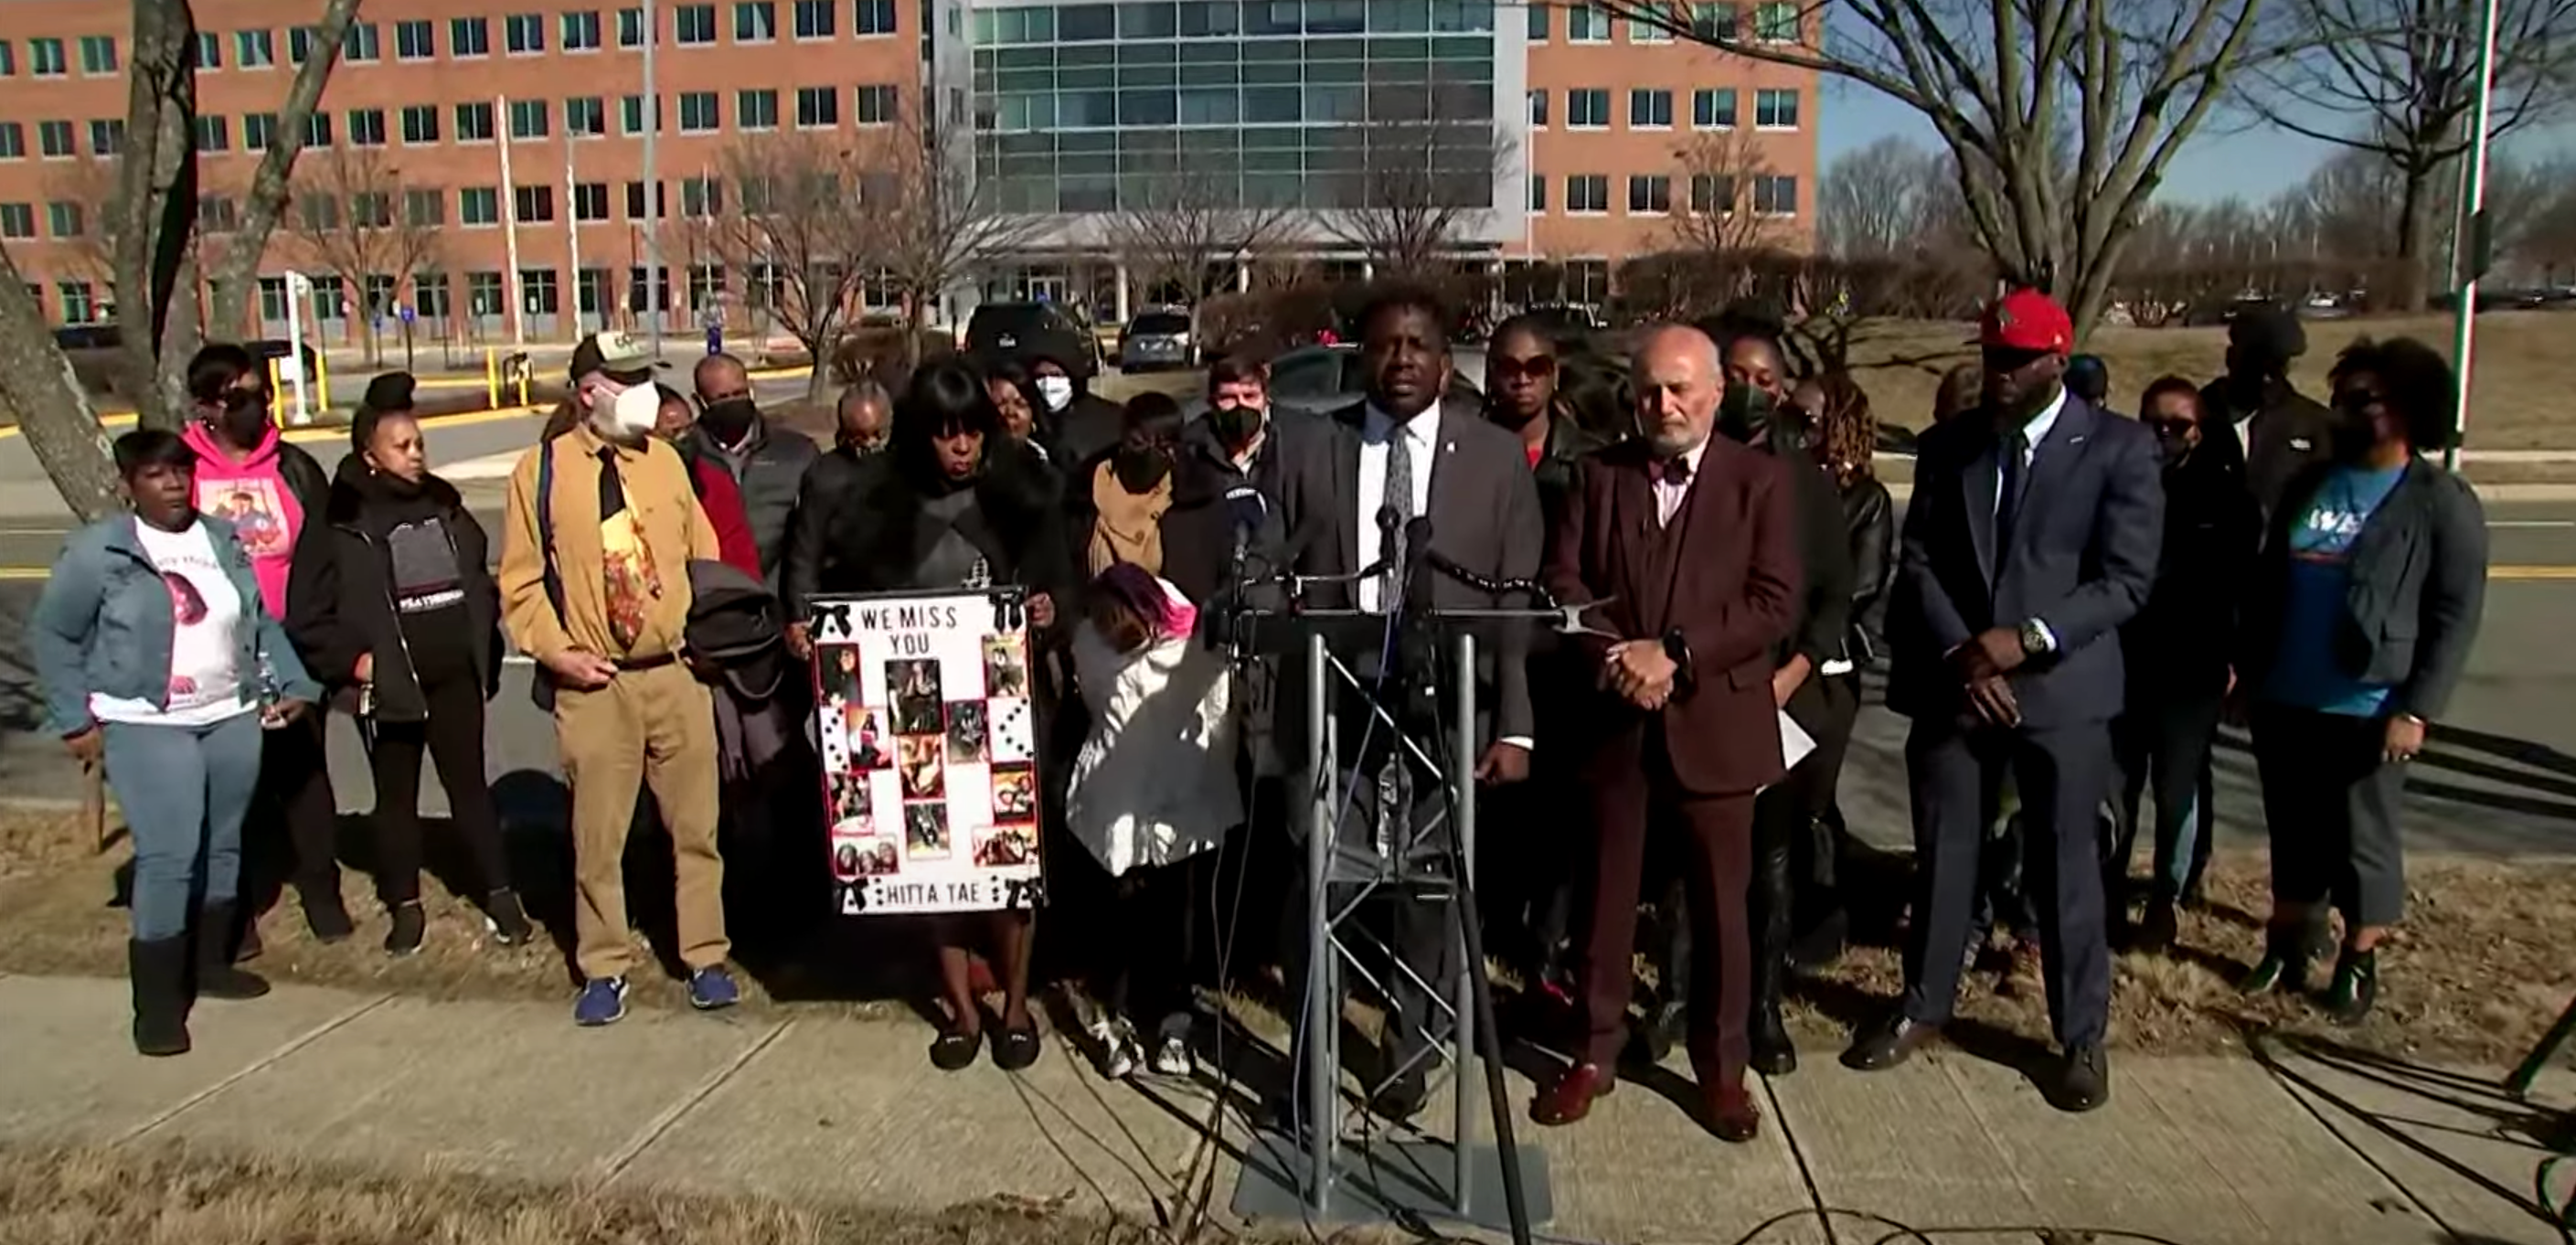 About two dozen family members and supporters of Demonte Ward-Blake took part in a news conference on Monday